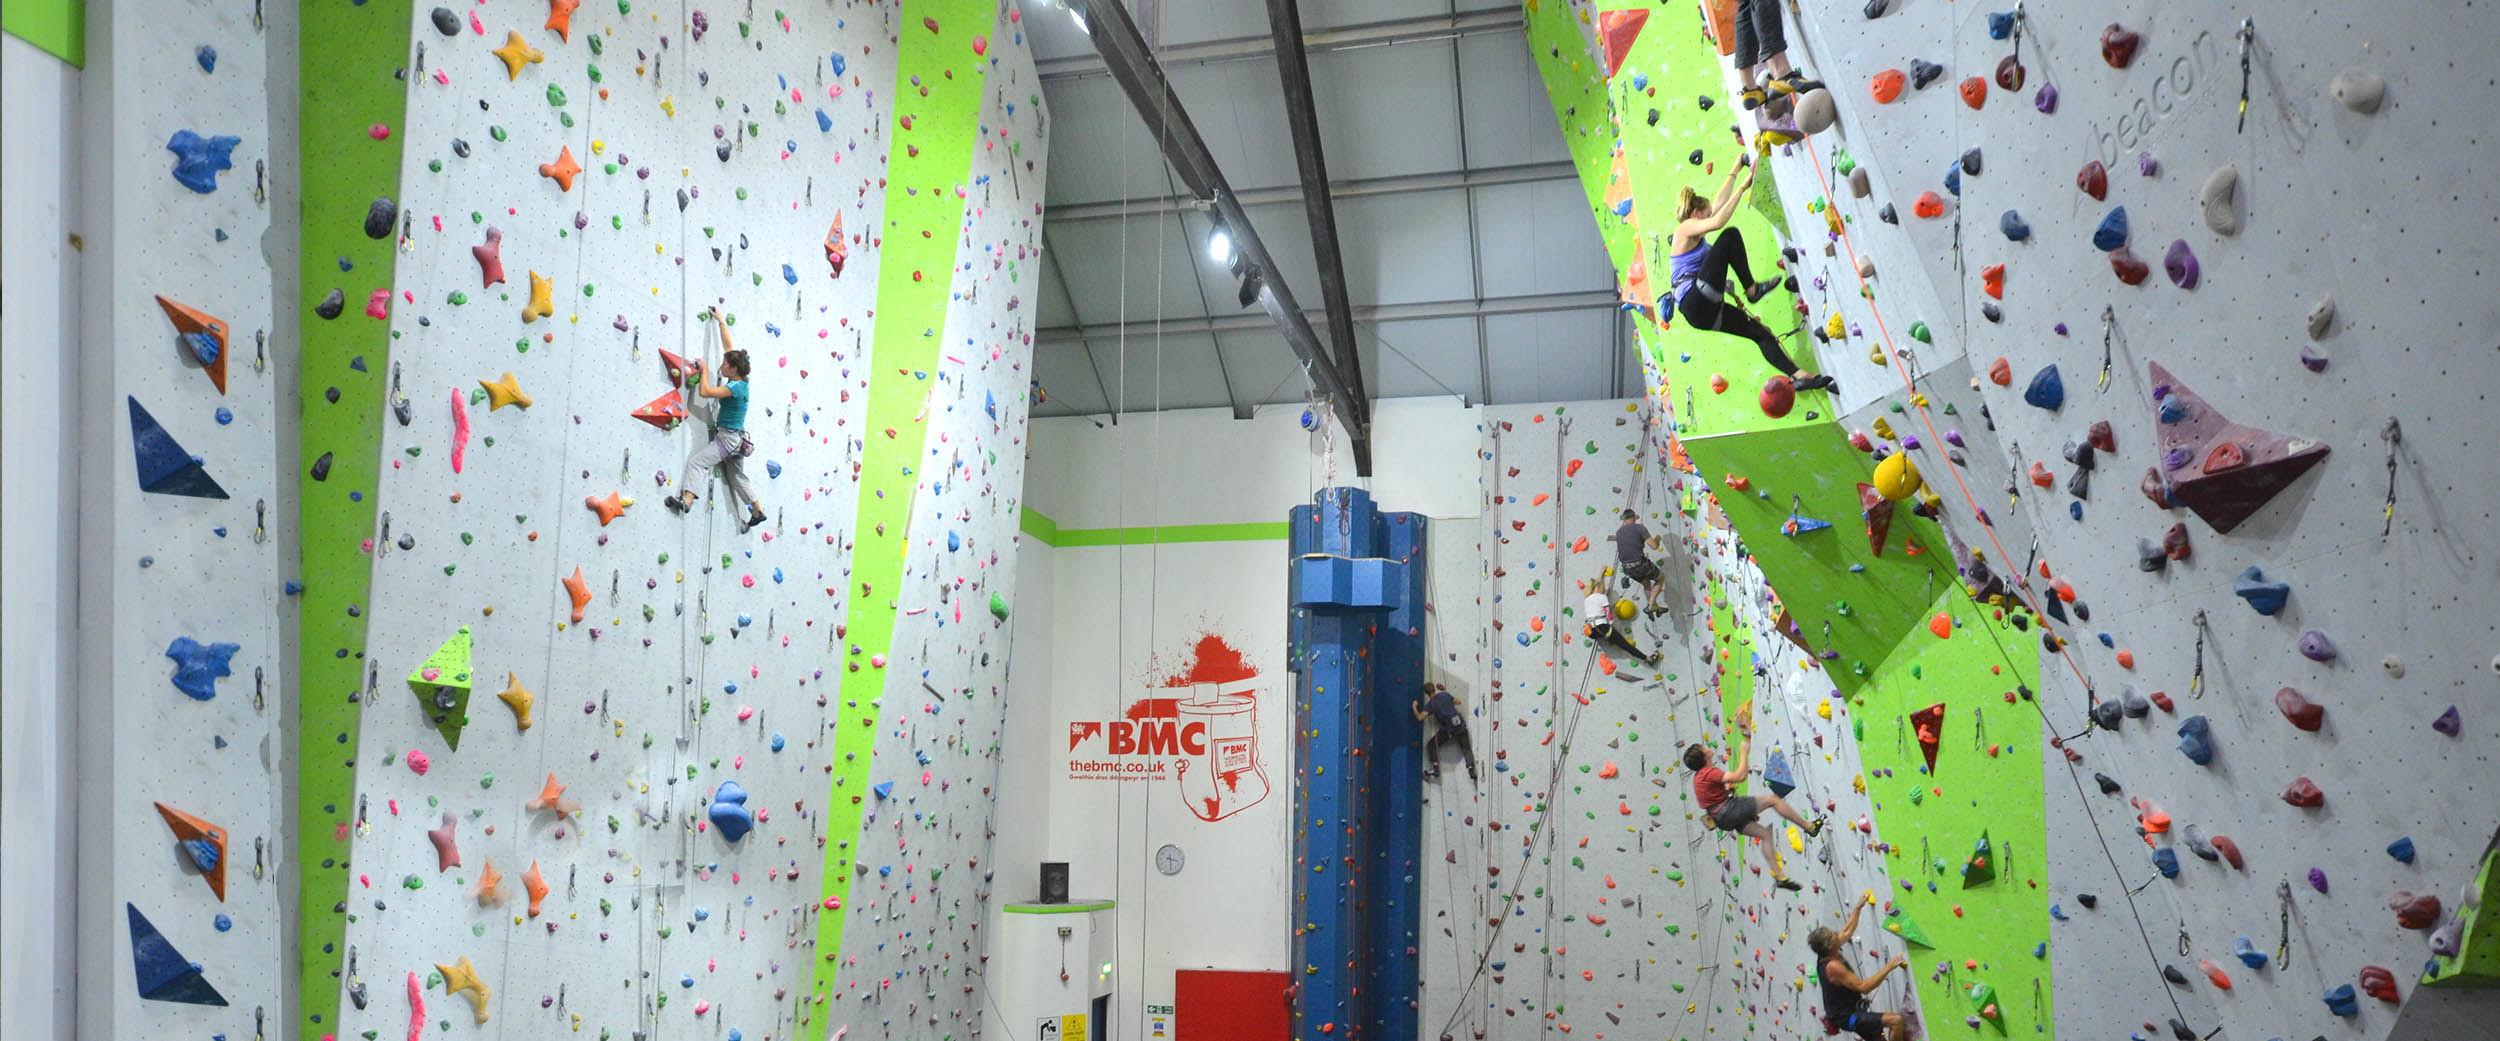 A young girl appears to be extremely focused as she makes her way across a short climbing wall